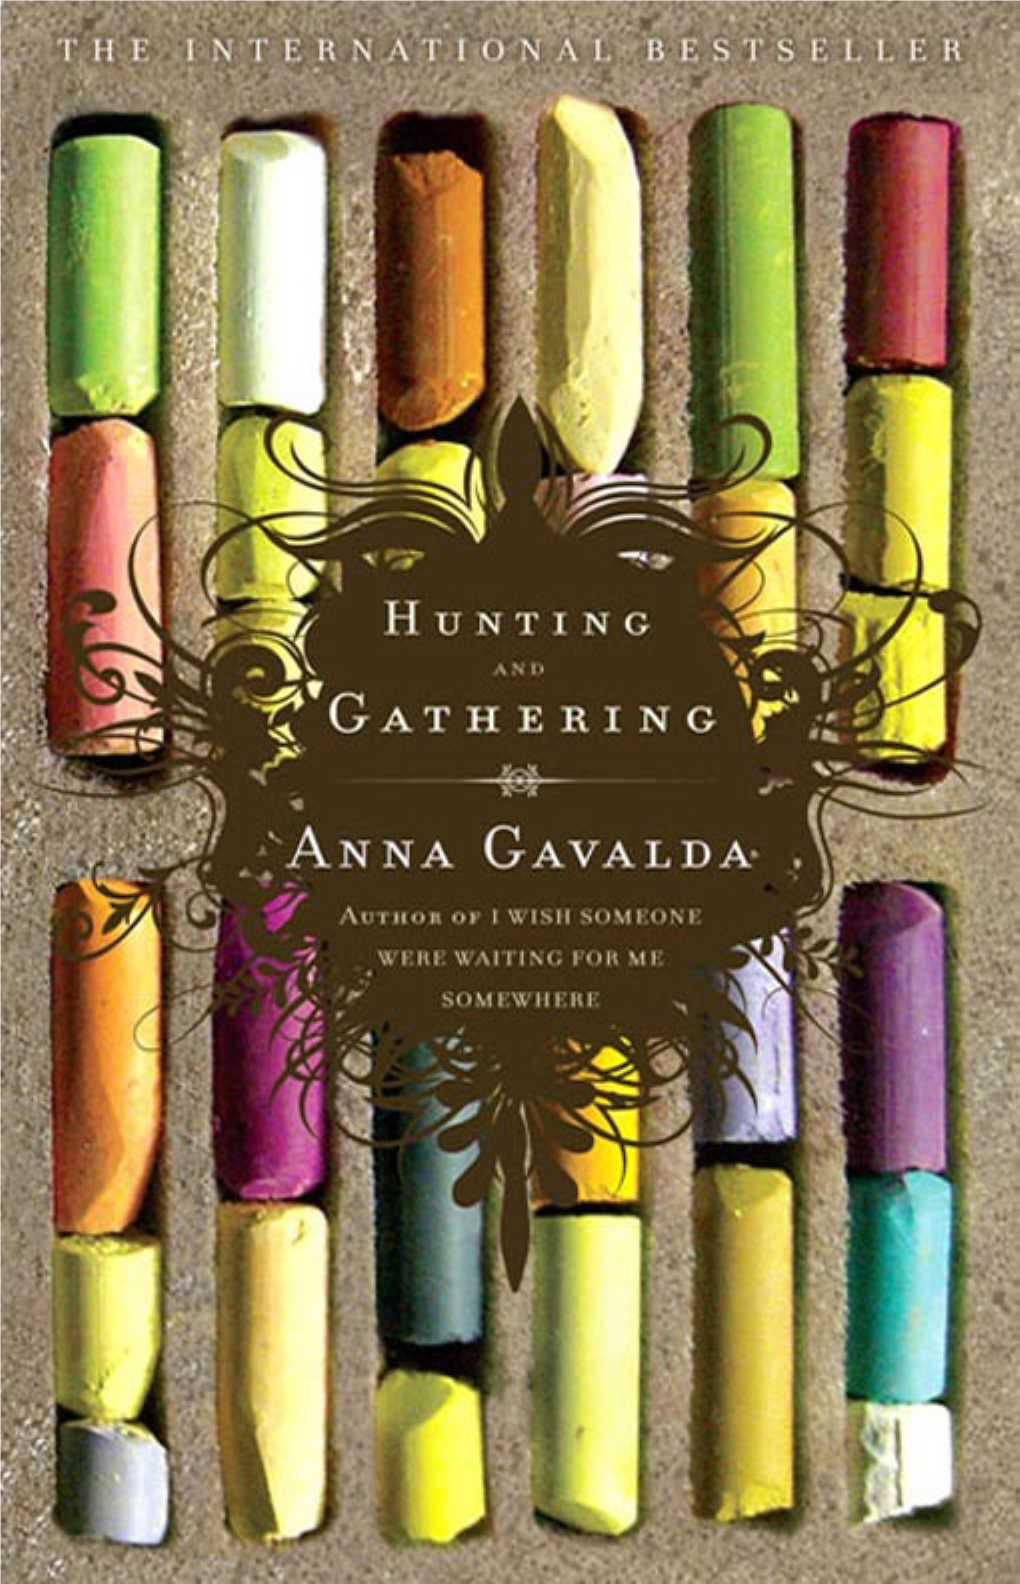 Hunting and Gathering Also by Anna Gavalda